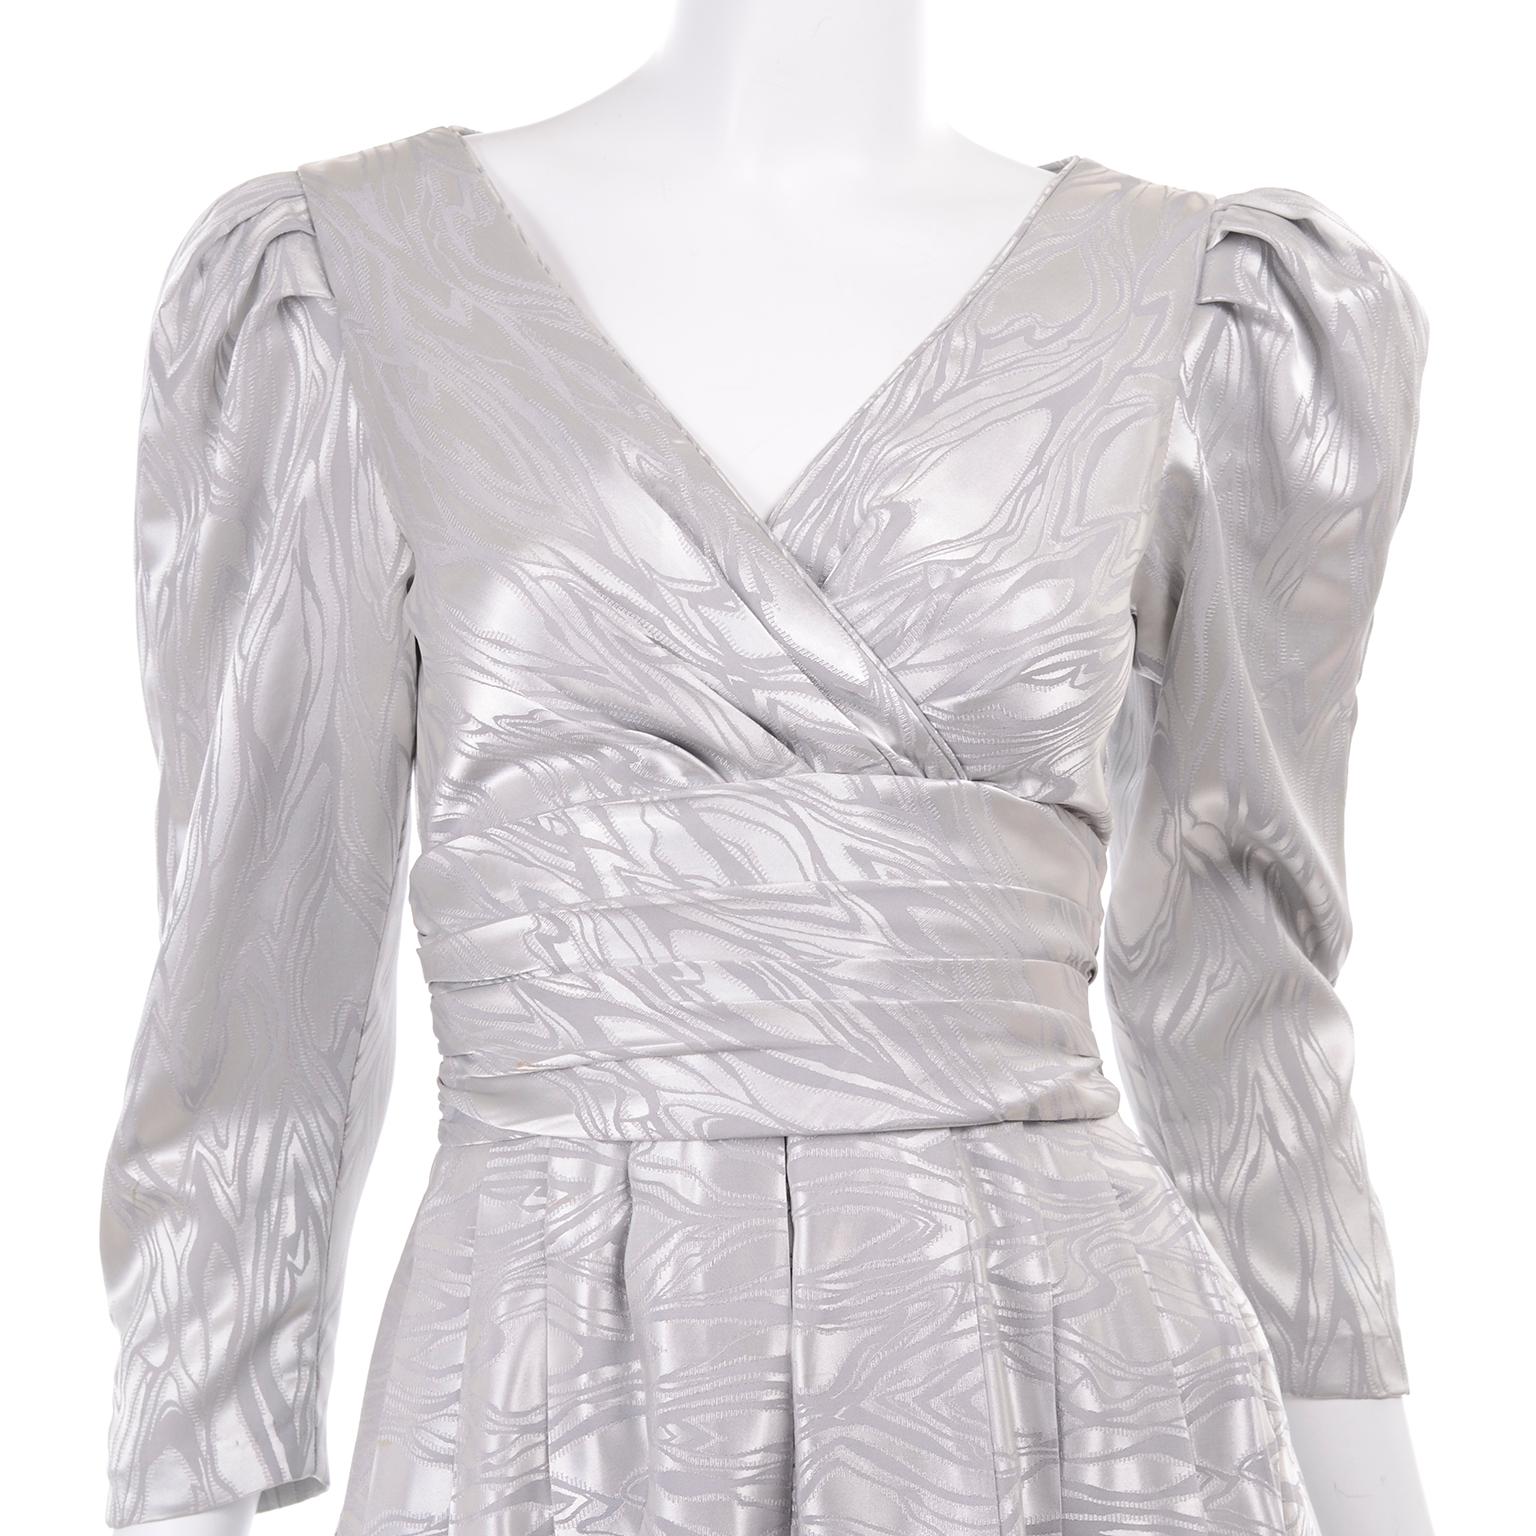 1980s A J Bari Vintage Silver Evening Dress w Puffed Gathered Sleeves ...